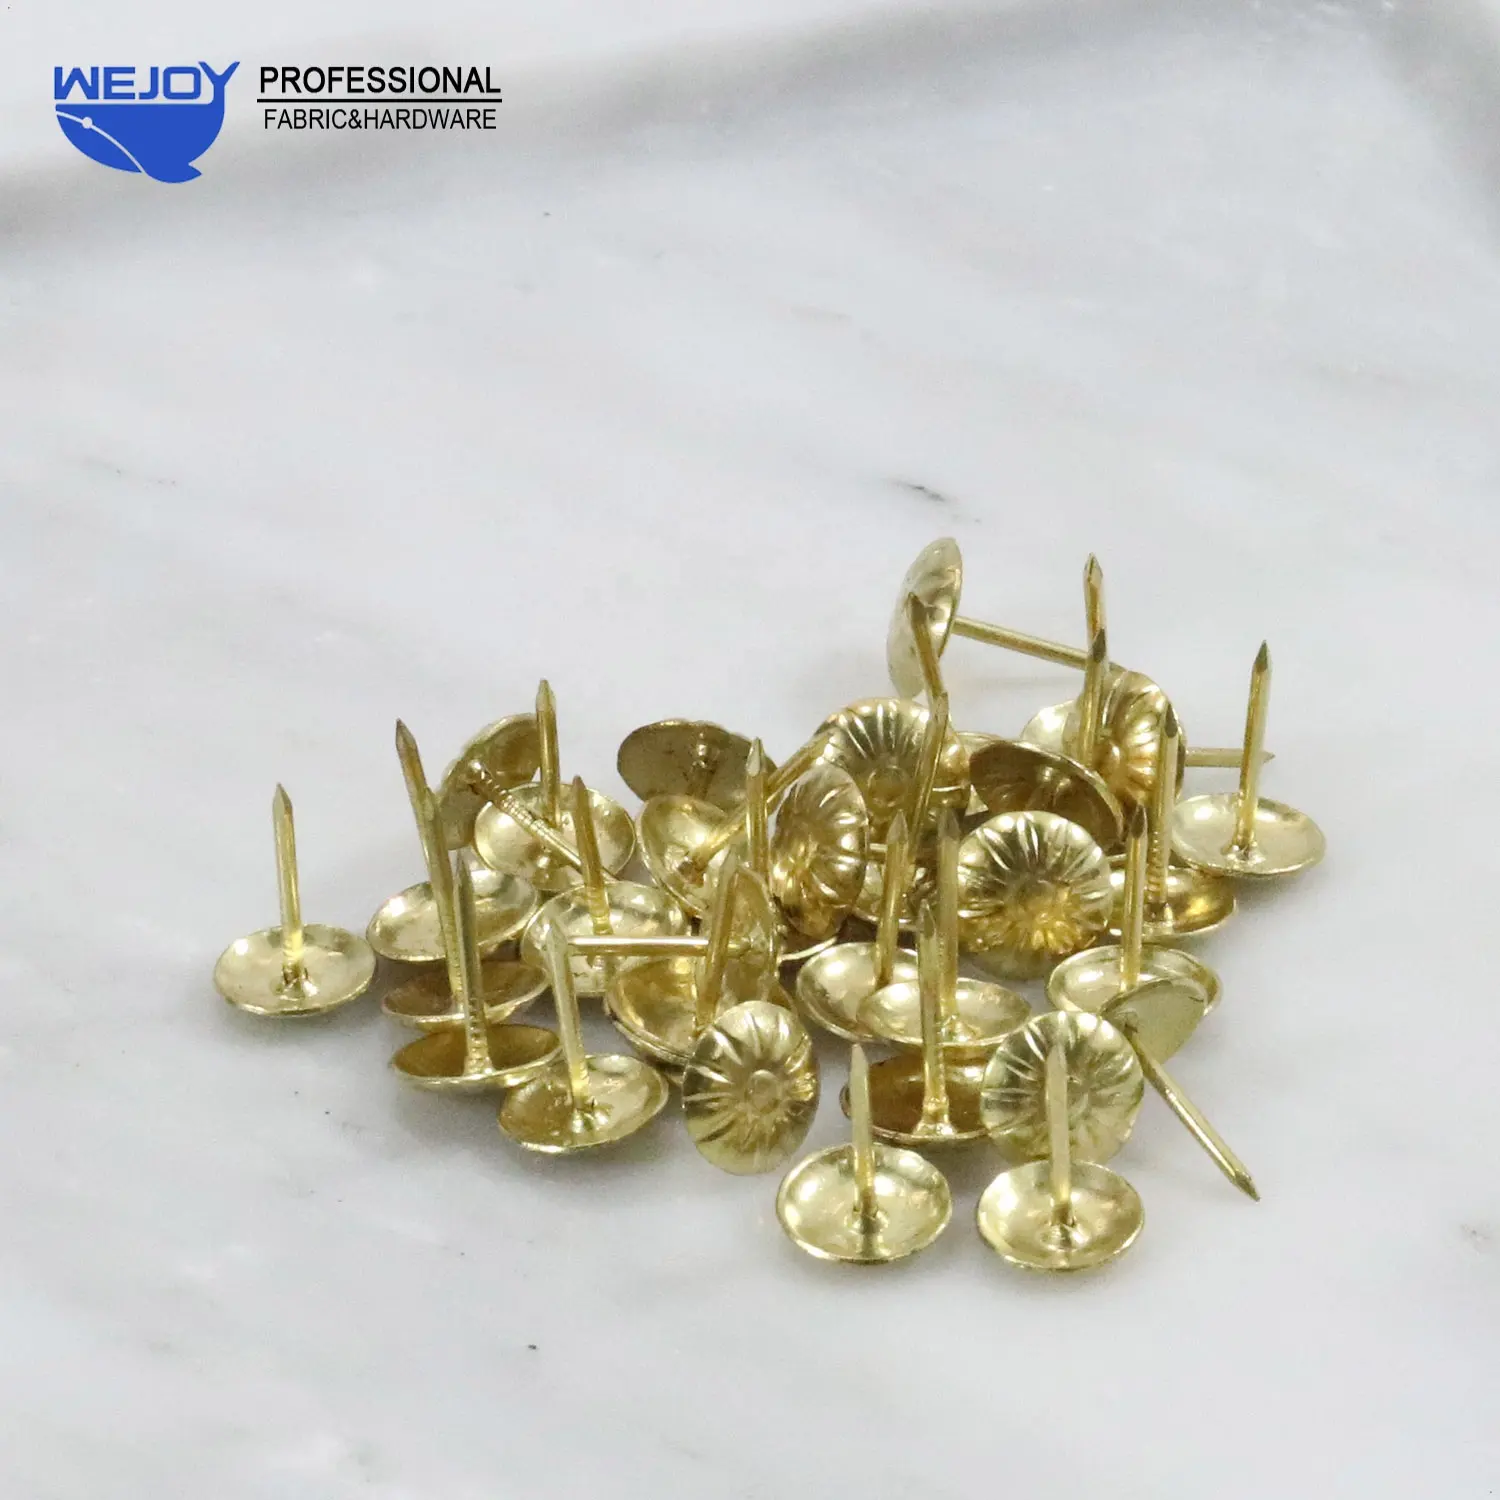 Wejoy 19mm Golden color with smooth model round head sofa chair stud strips upholstery furniture nails for furniture